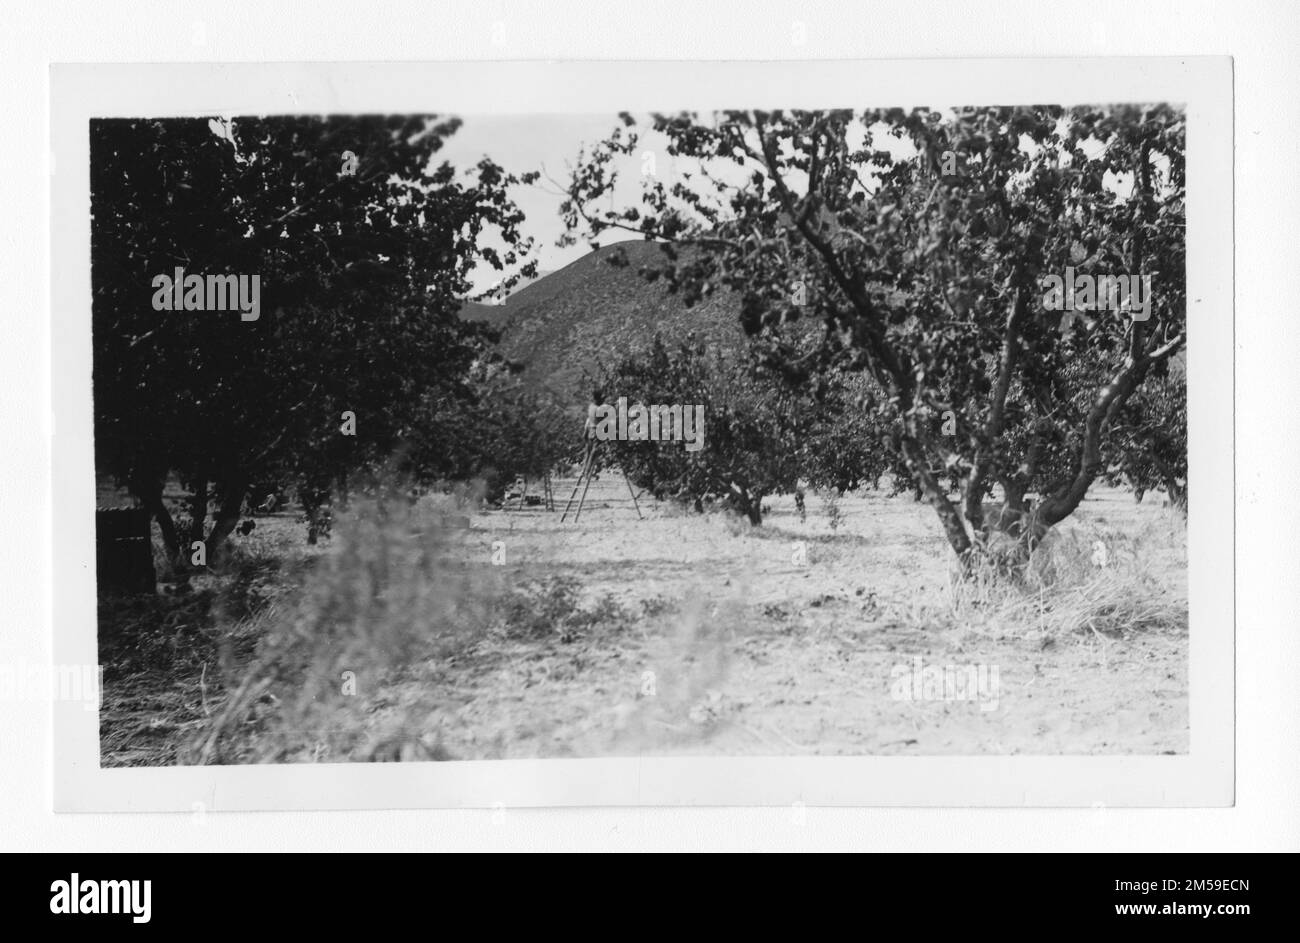 Original caption: 'Picking apricots in a Morongo orchard. In order to avoid loss, enough pickers to keep abreast of ripening have to be provided by the Indian orchardist. Indians from neighboring reservations are given employment during the fruit harvest by the local Indians.'. 1936 - 1942. Pacific Region (Riverside, CA). Photographic Print. Department of the Interior. Office of Indian Affairs. Mission Agency. 11/15/1920-6/17/1946. Photographs Stock Photo